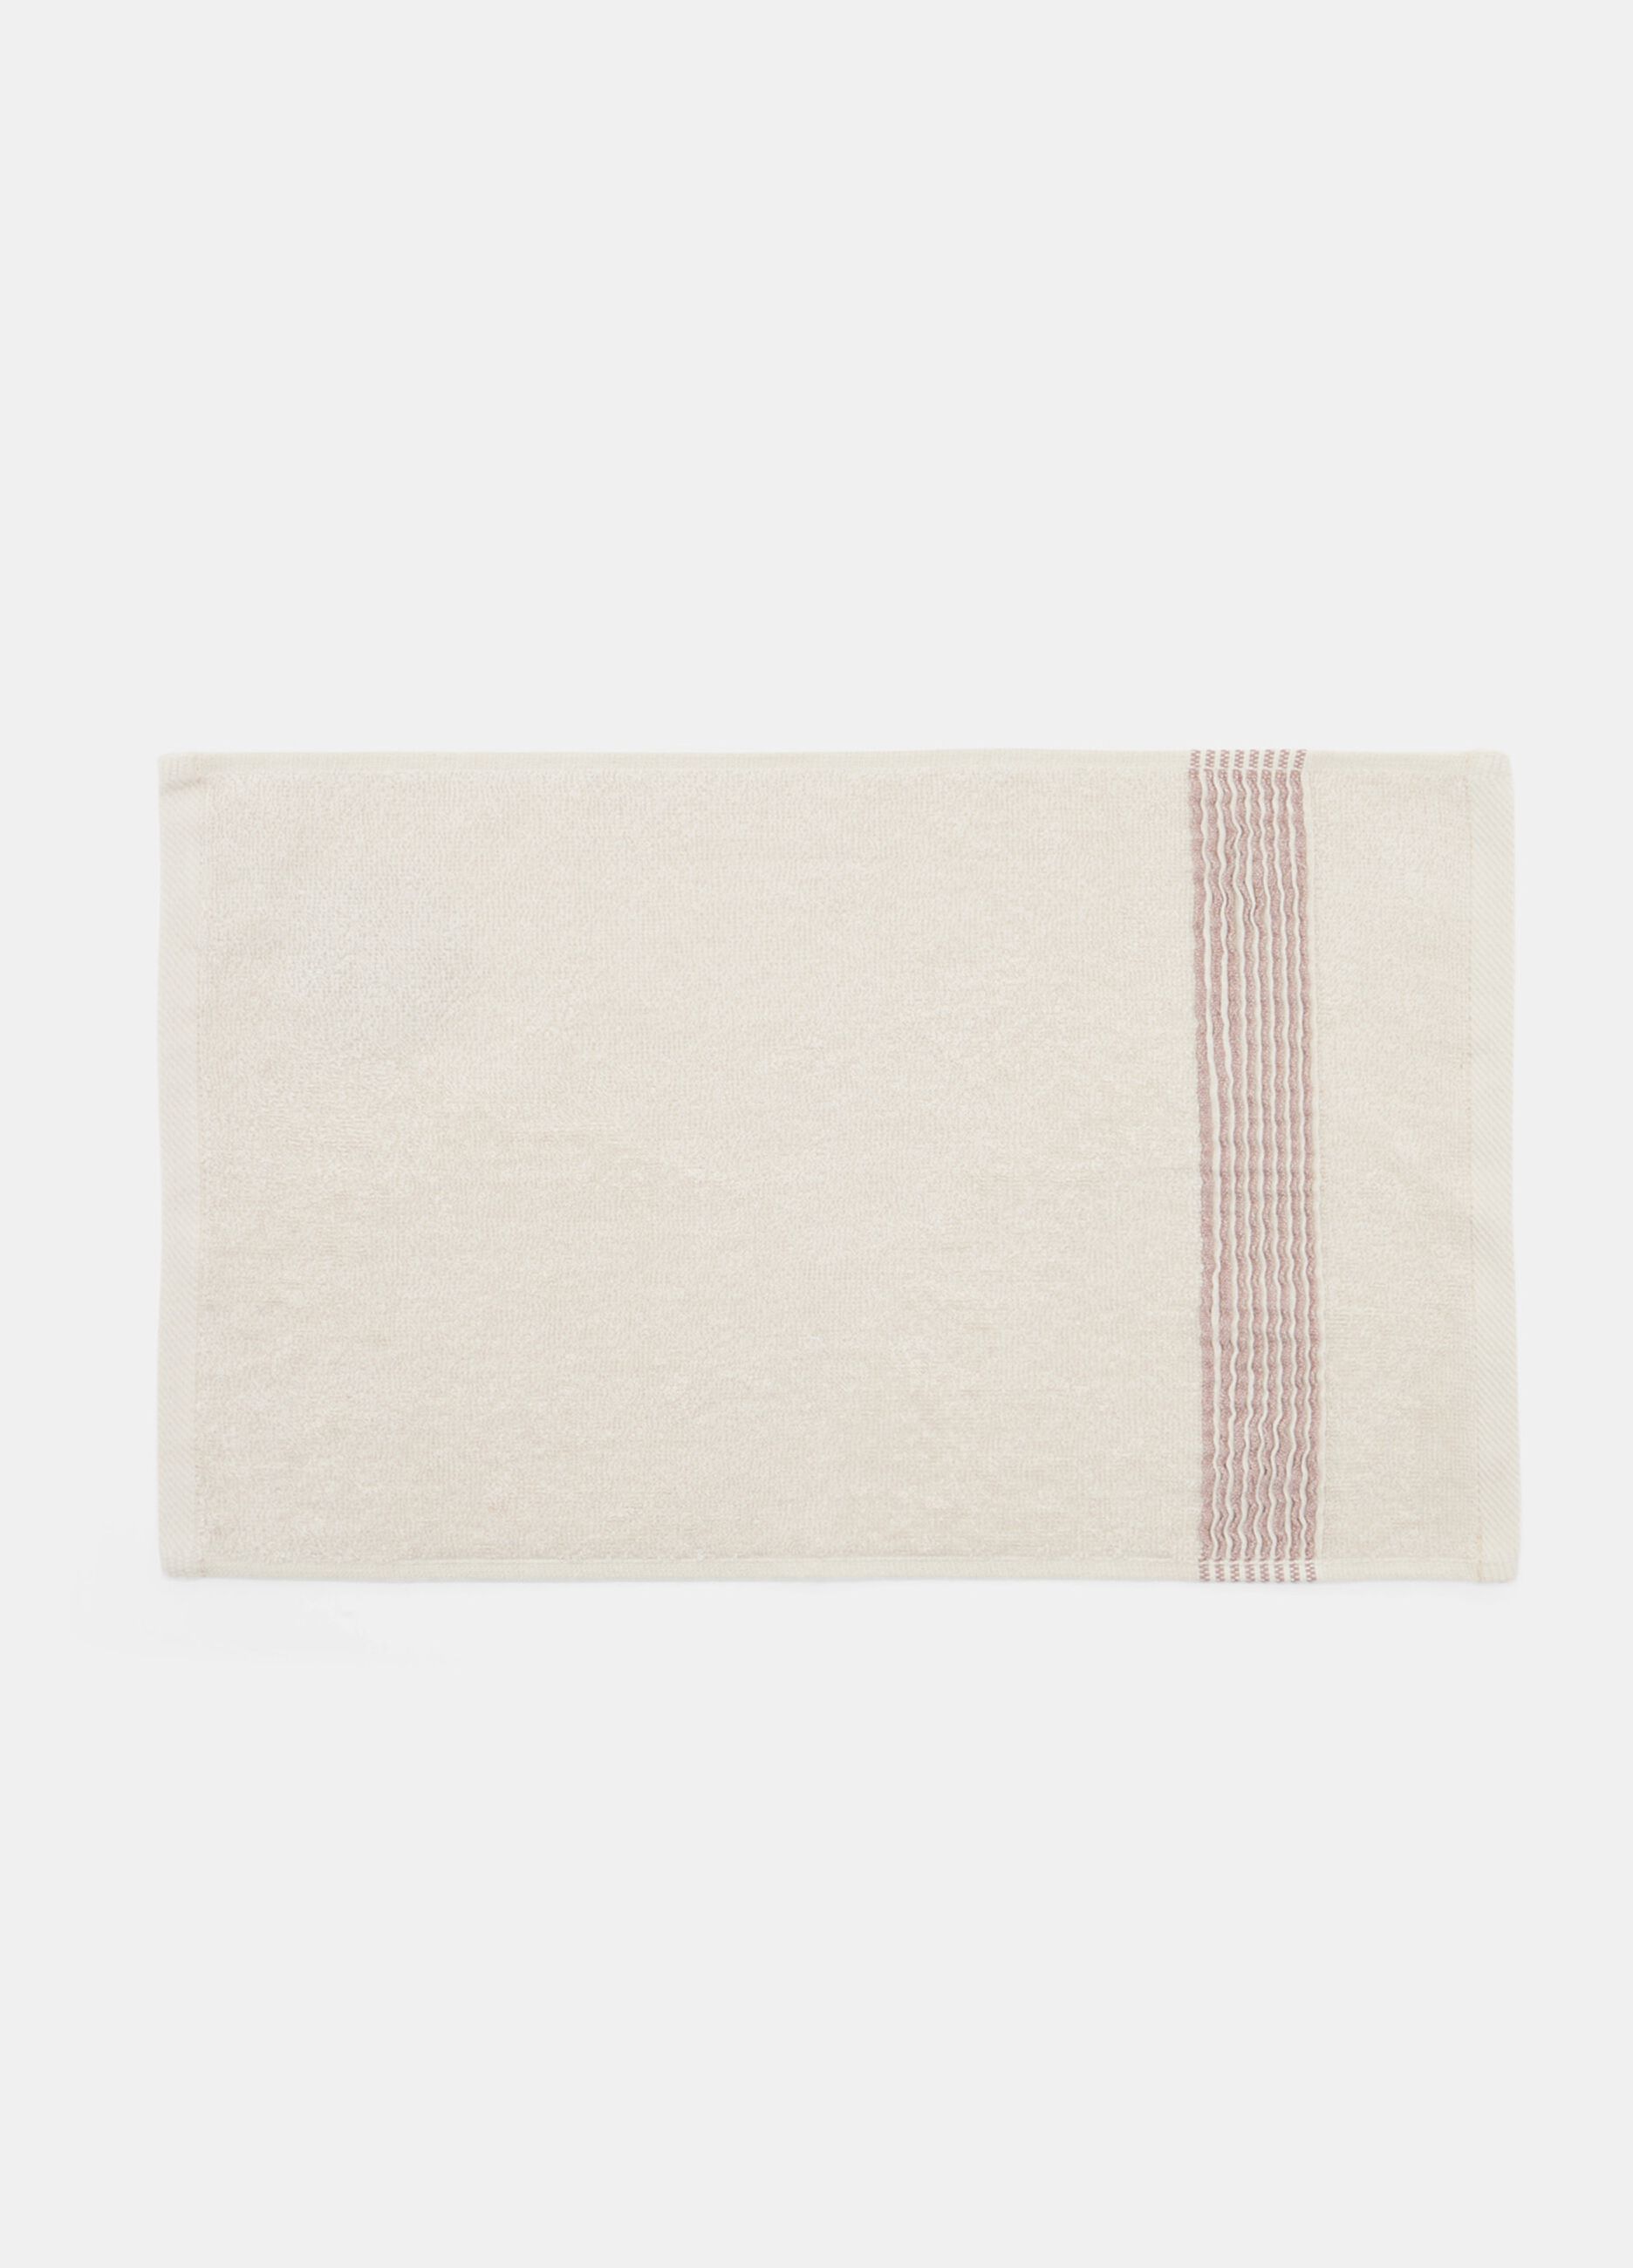 Guest towel in 100% cotton